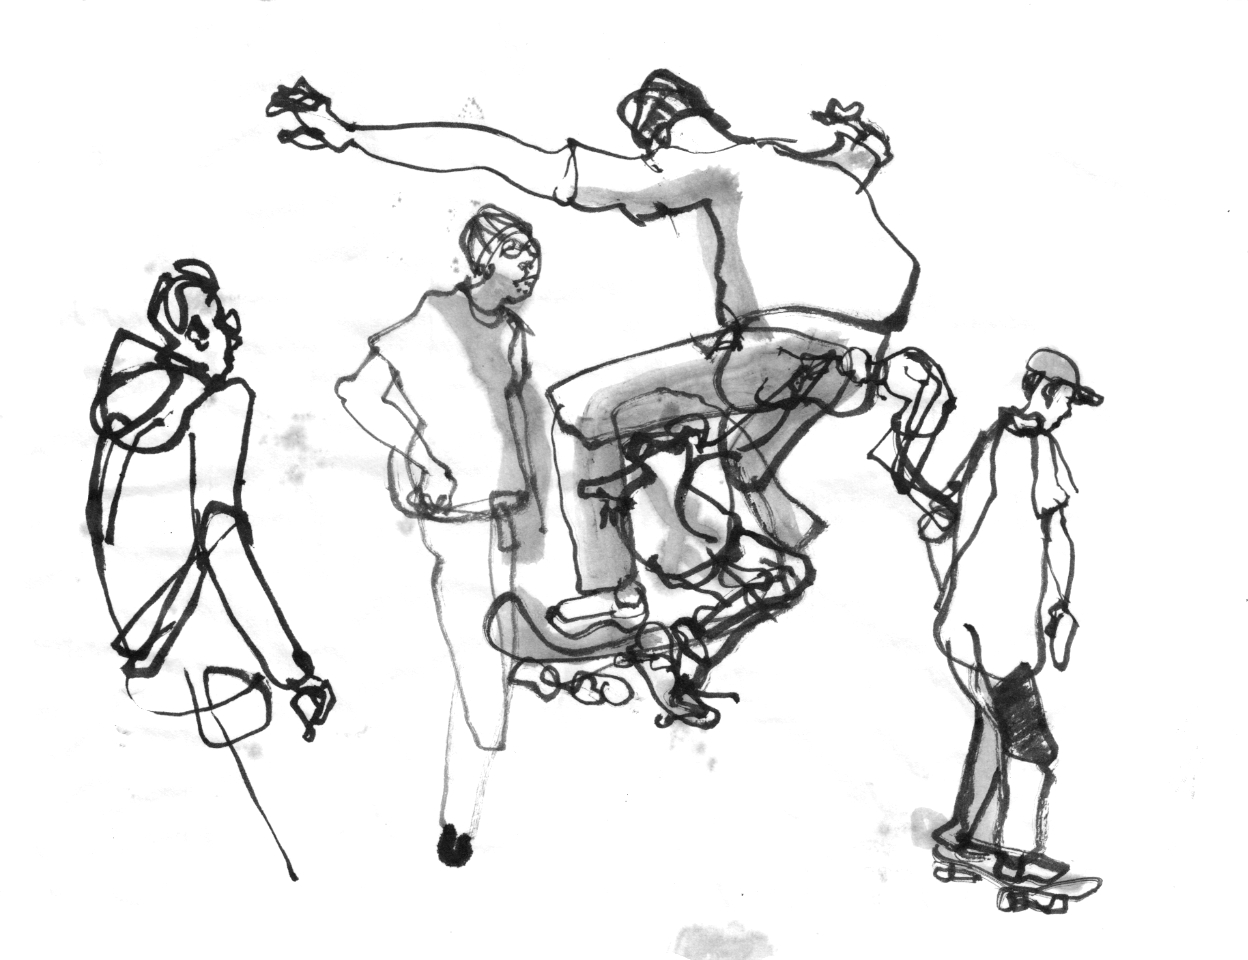 Inkdrawing of skateboarders, one in the air, two observing and one passing by on his board